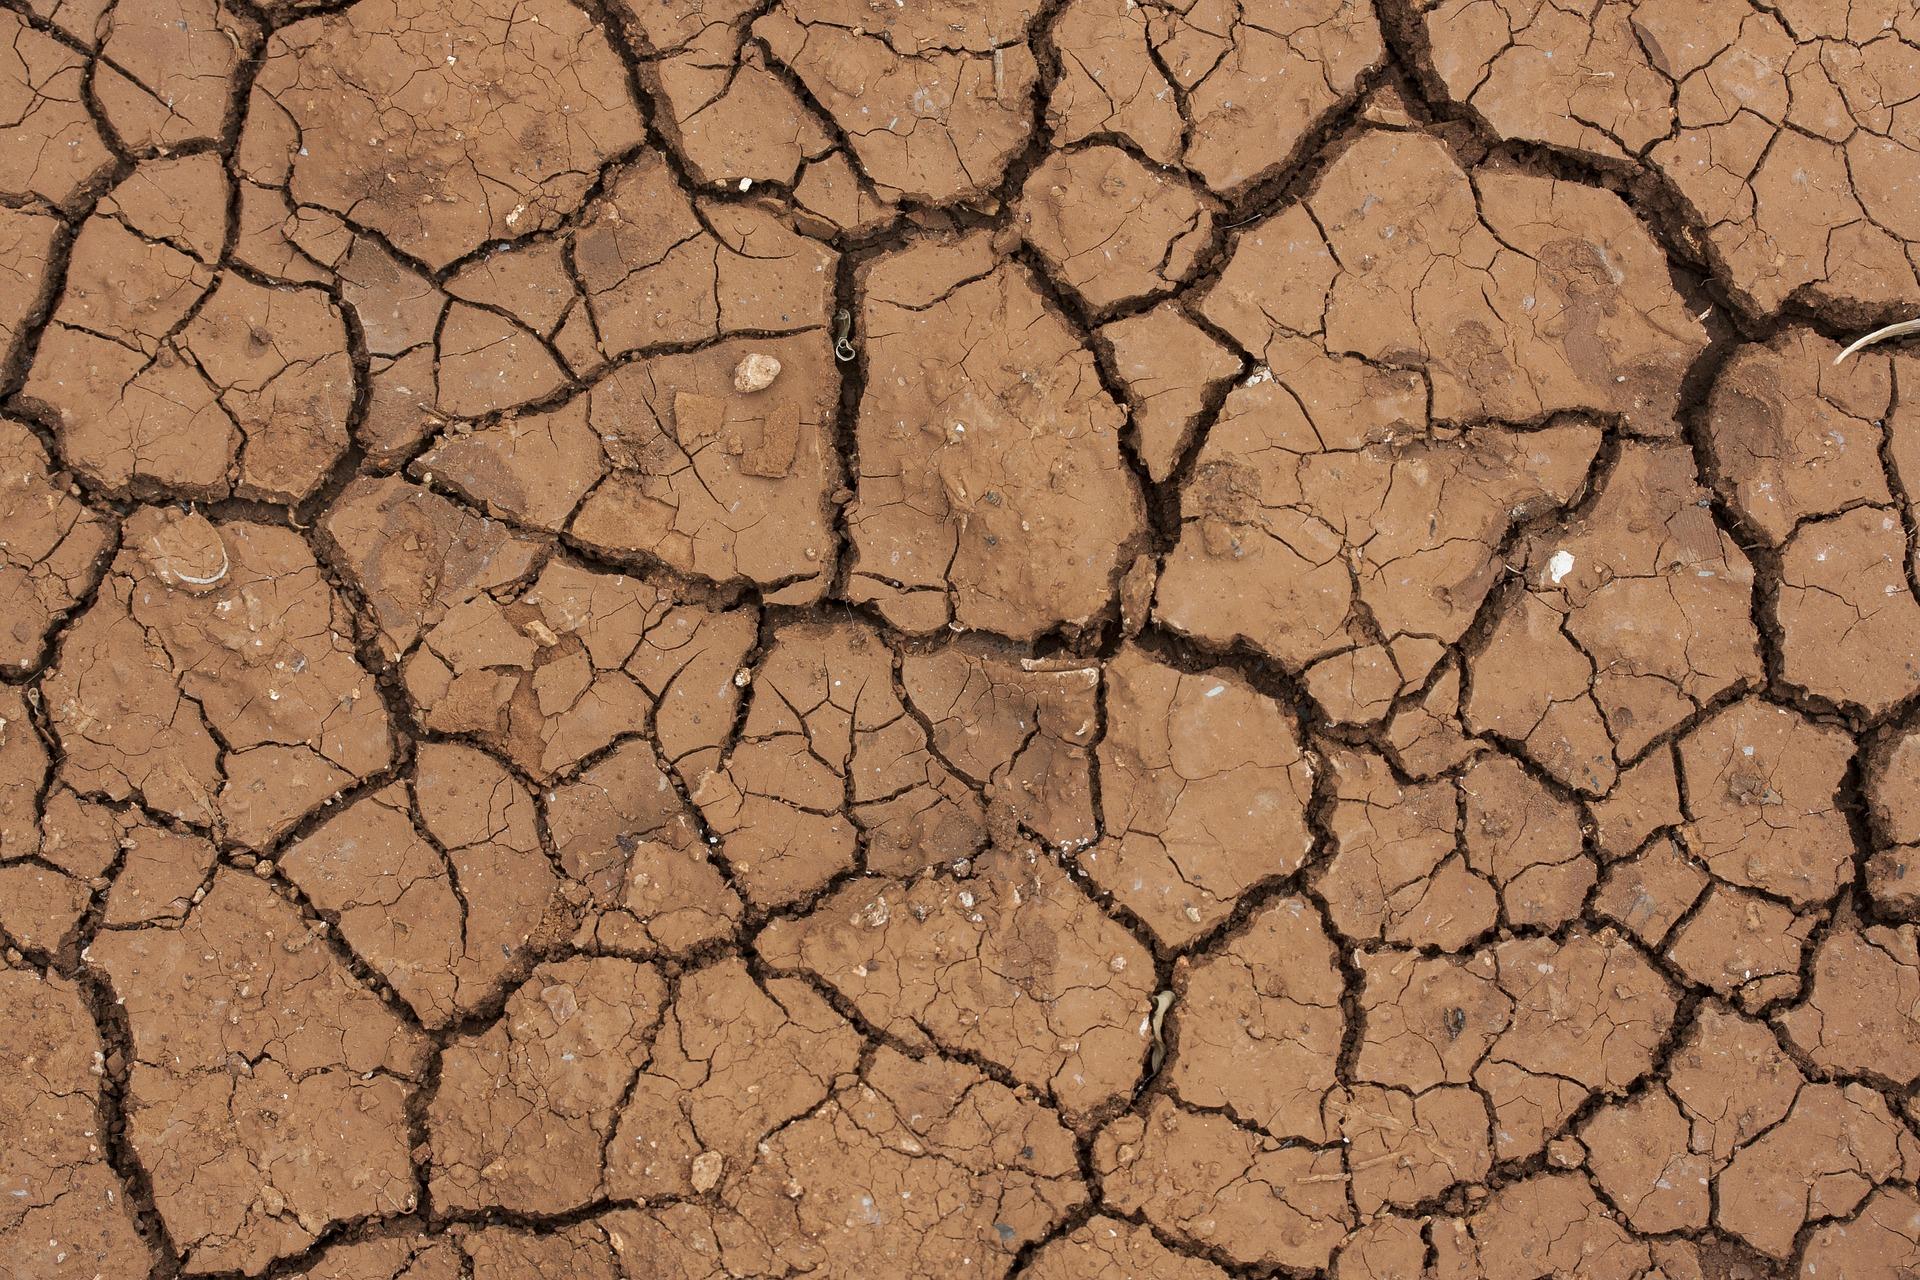 Parched Earth Image by Engin Akyurt from Pixabay 